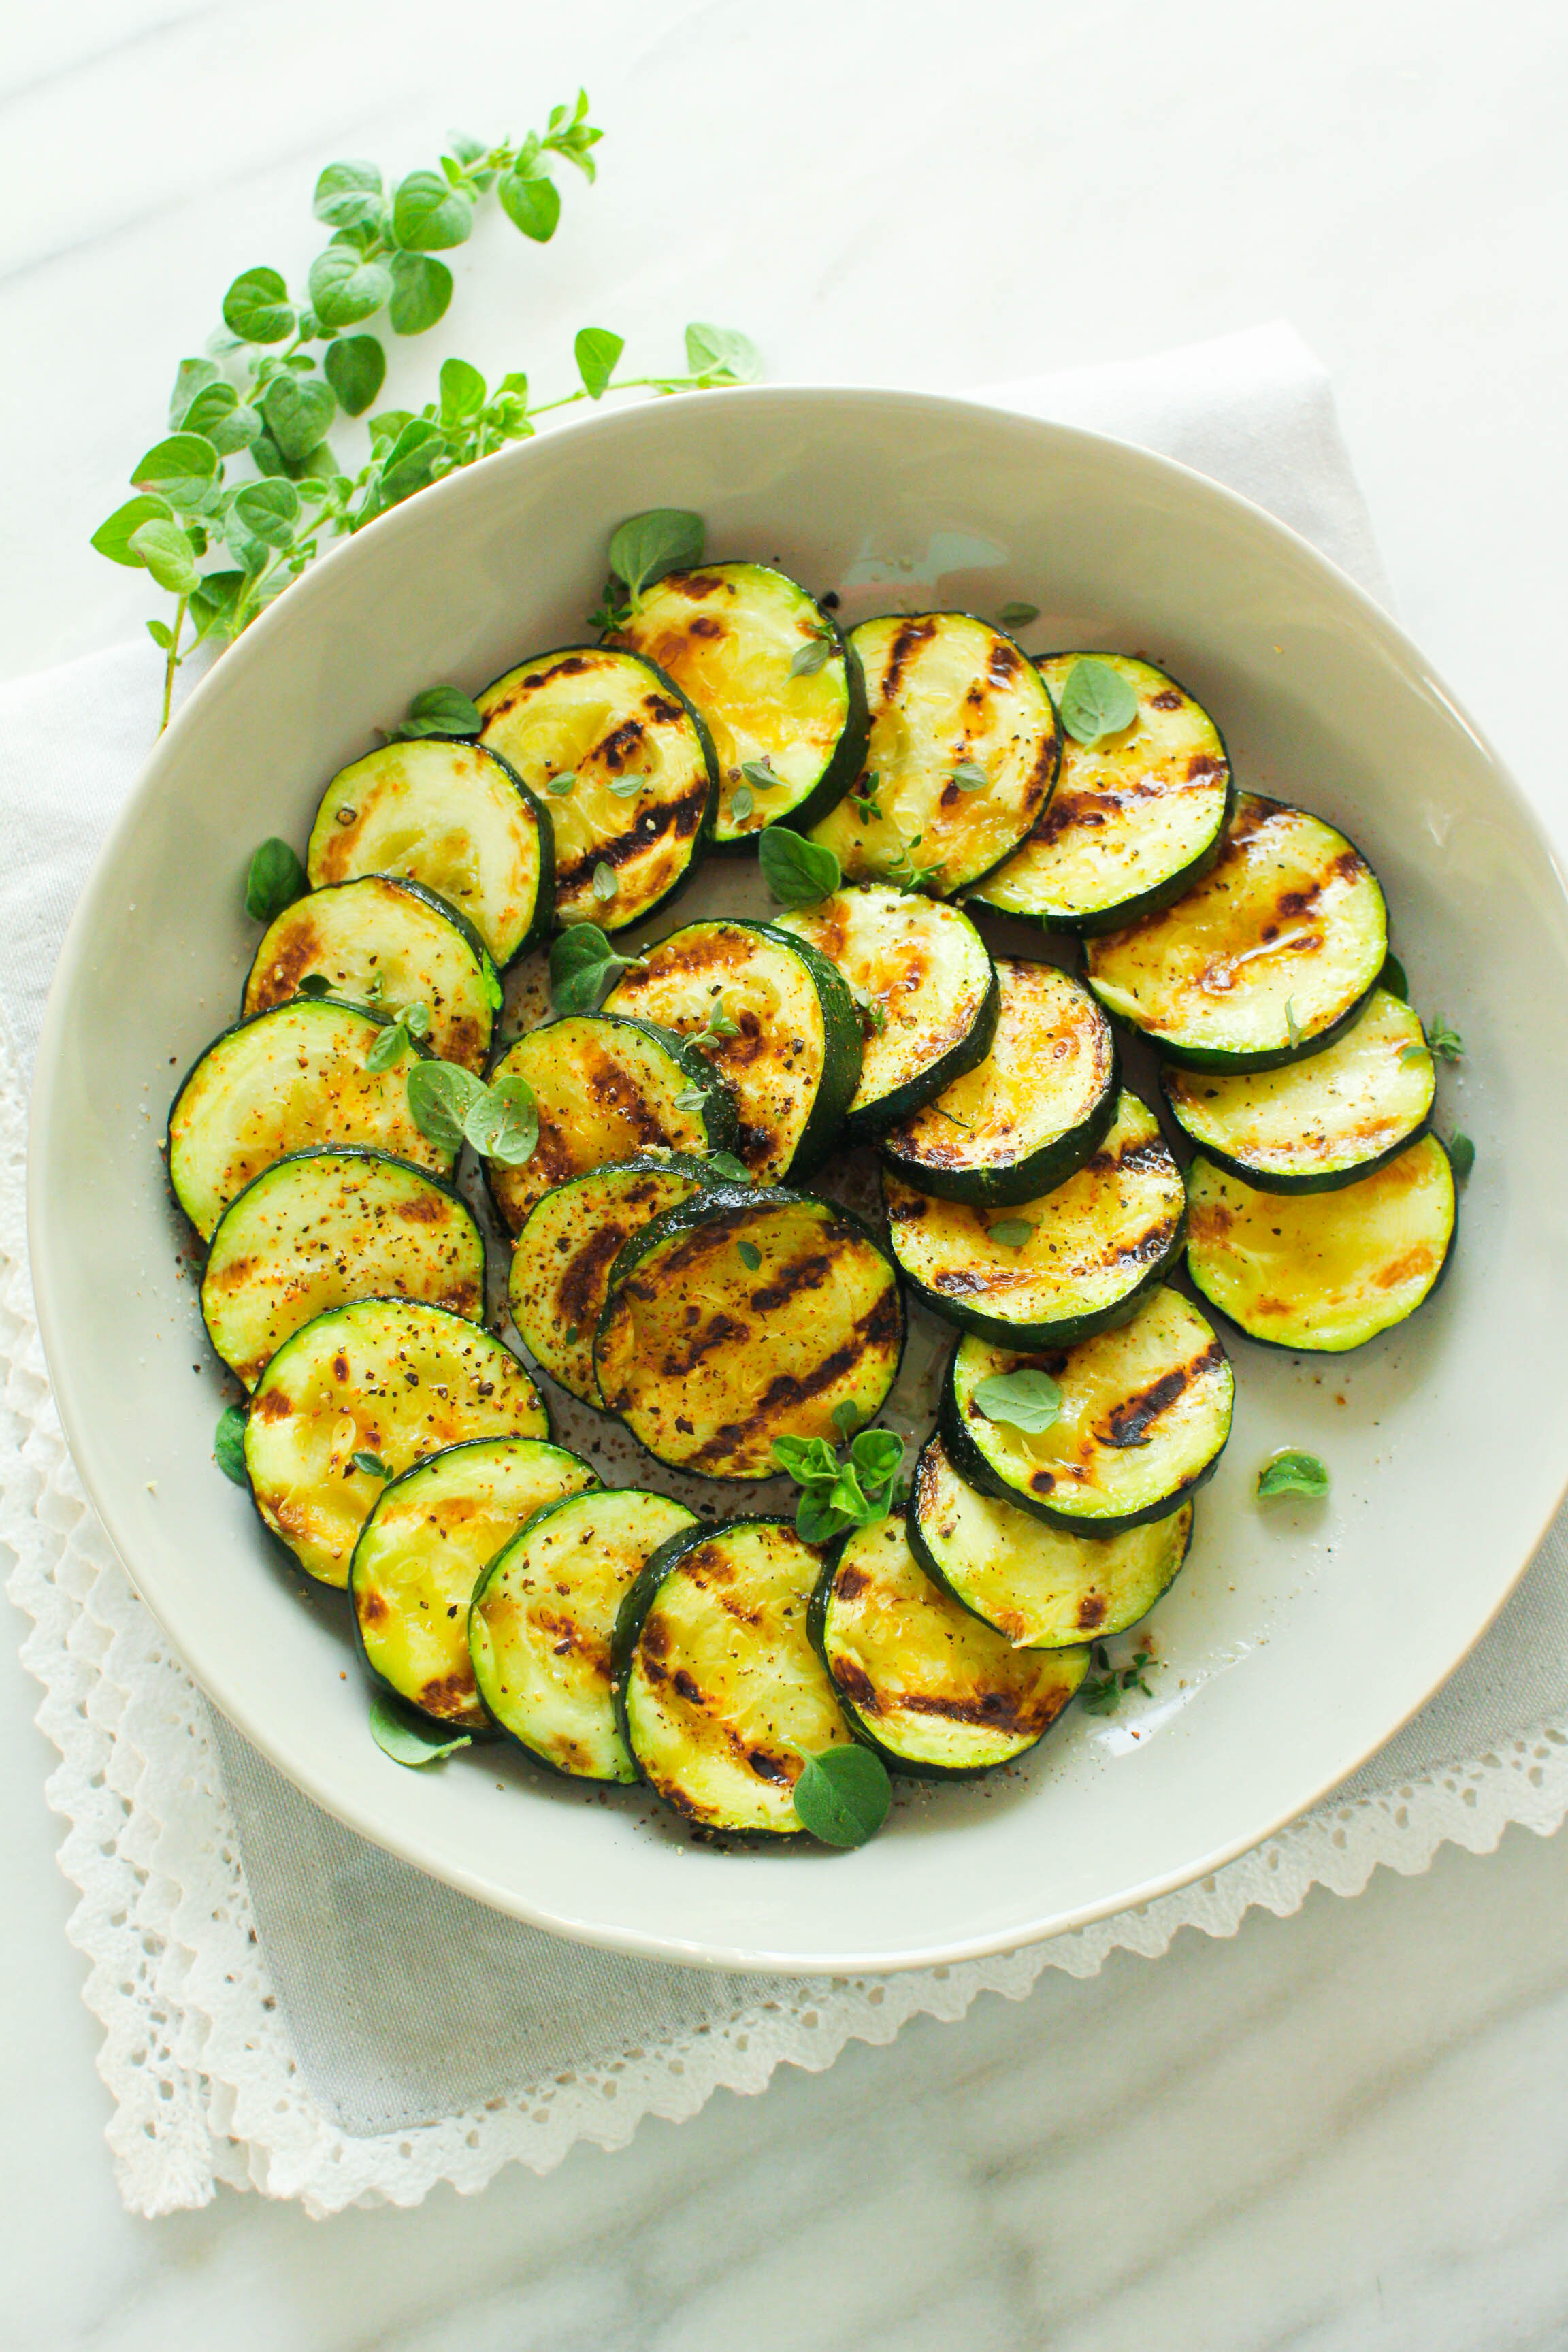 Grilled Zucchini Medallions